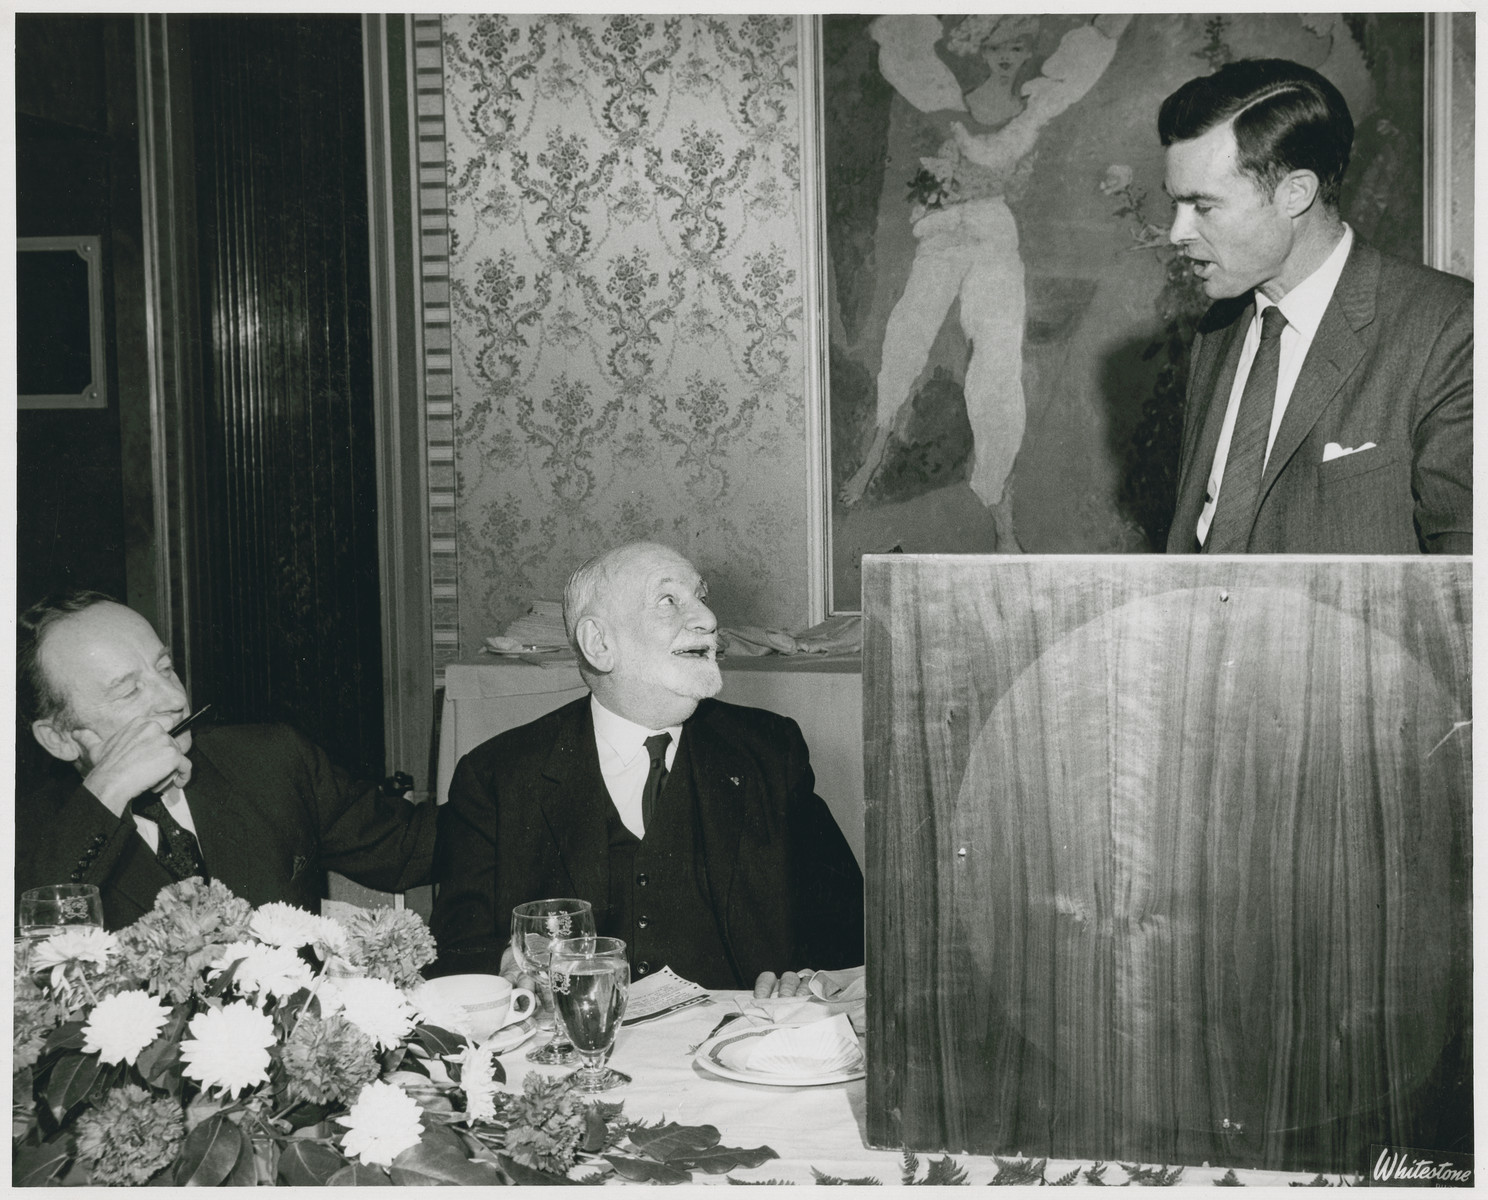 Benjamin Ferencz and Rene Cassin look on as John Carey speaks at an event in New York City hosted by Bnai Brith honoring Rene Cassin.  

Cassin was awarded the Nobel Peace Prize in 1968 for writing the Universal Declaration of Human Rights that was adopted by the United Nations.